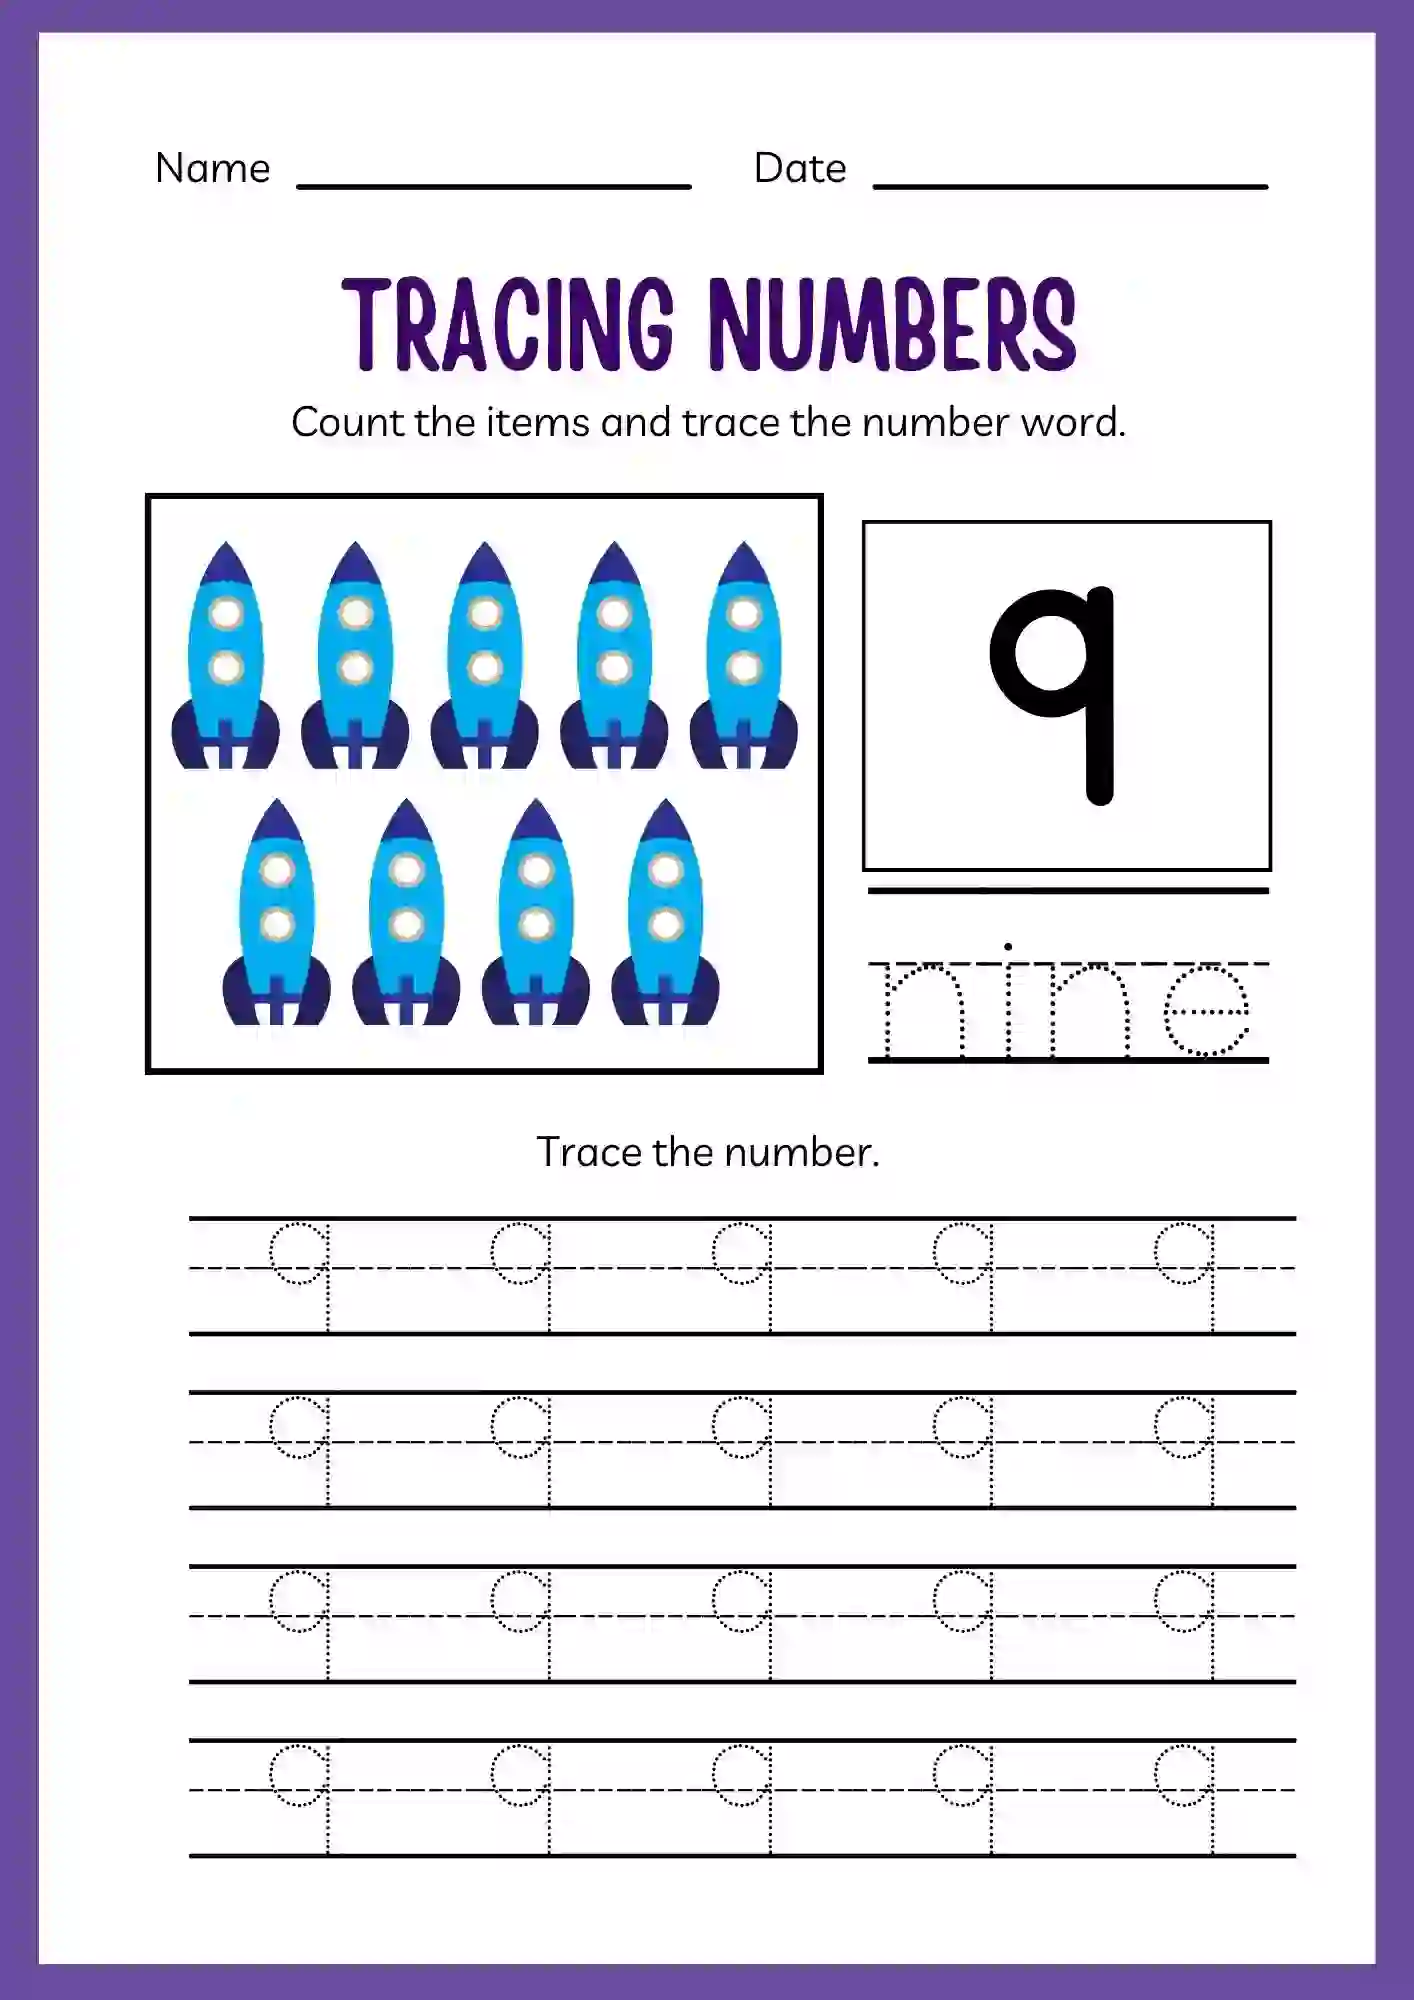 Number Tracing Worksheets 1 to 20 (Number 9 tracing sheet)